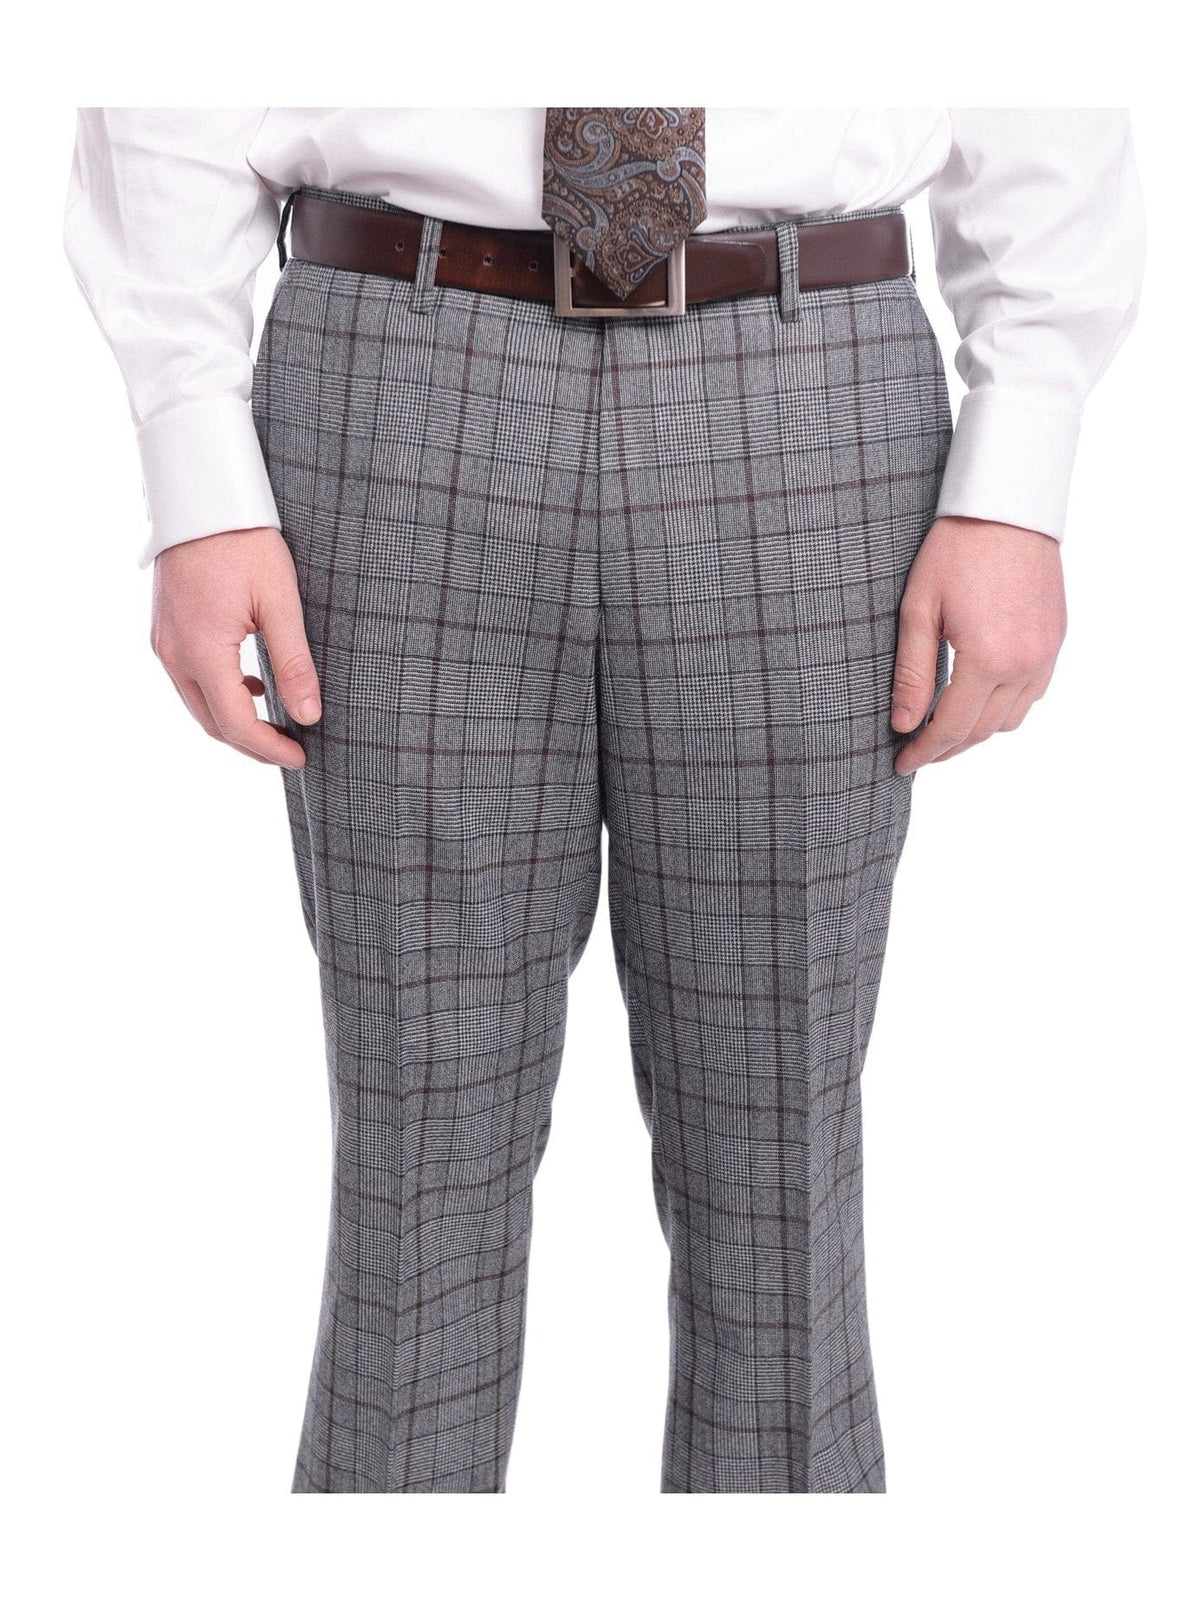 Napoli TWO PIECE SUITS Napoli Slim Fit Blue &amp; Brown Glen Plaid Half Canvassed E Thomas Wool Suit